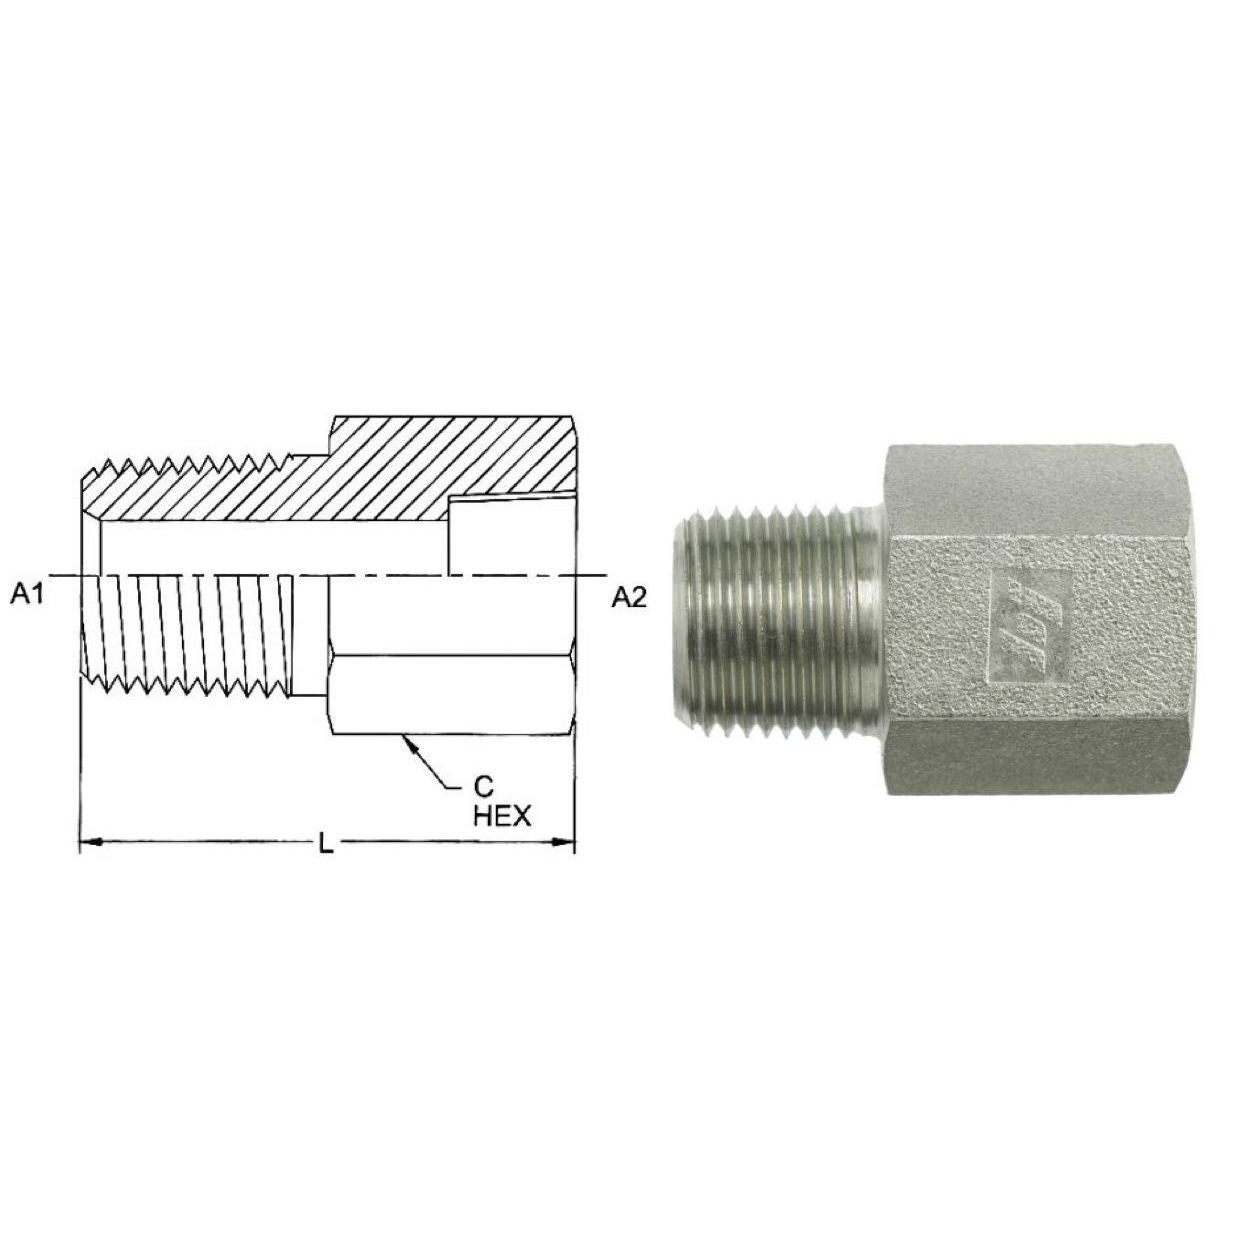 5405-04-04 : OneHydraulics Adapter, Straight Expander, 0.25 (1/4") Male NPT x 0.25 (1/4") Female, Steel, 6000psi